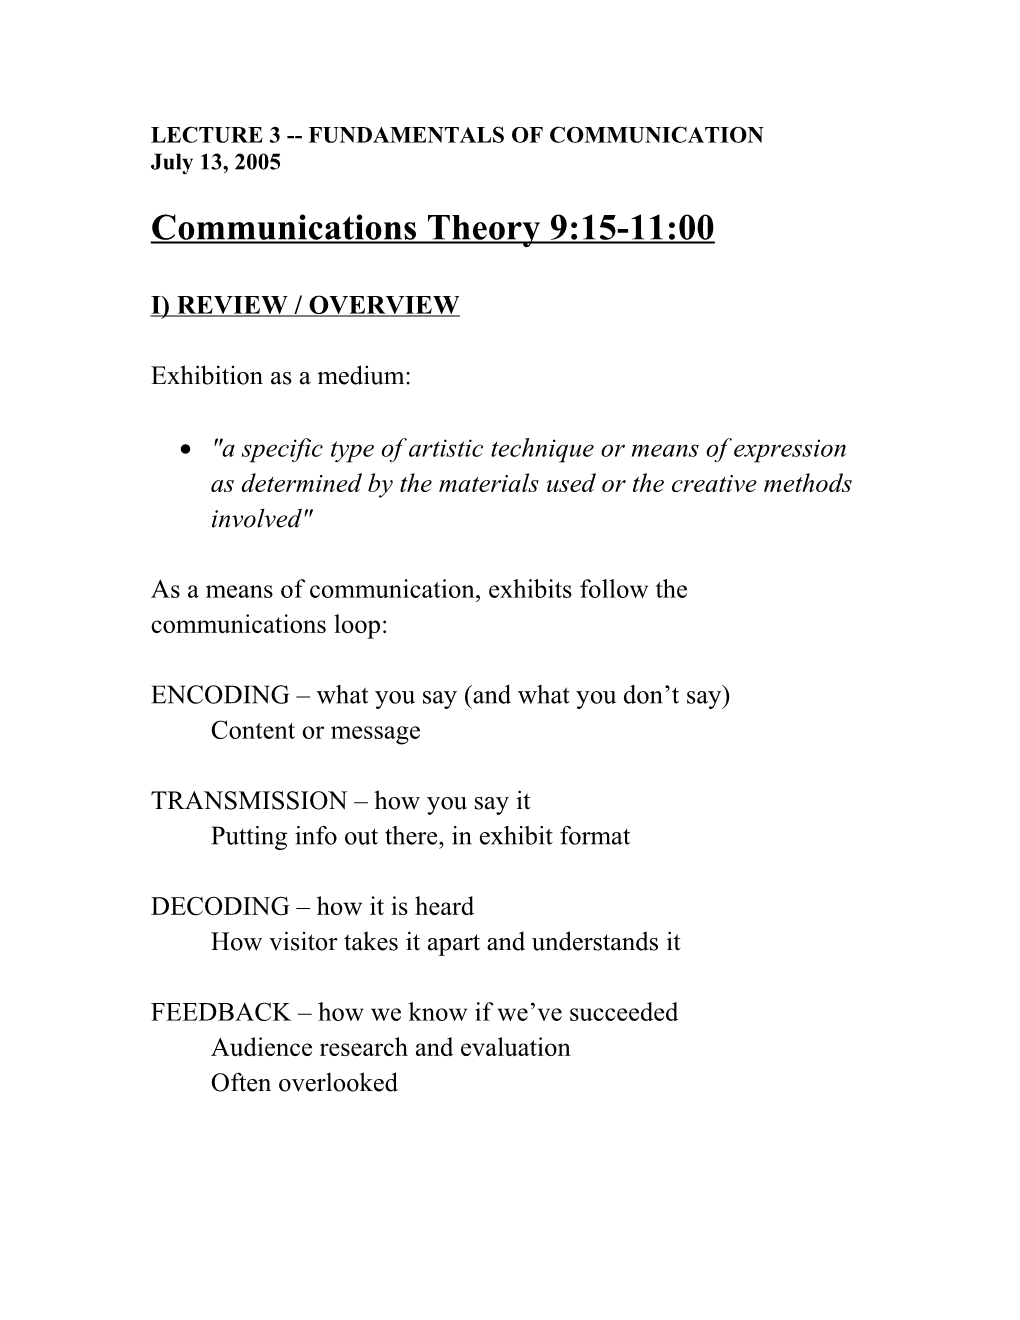 Lecture 3 Fundamentals of Communication